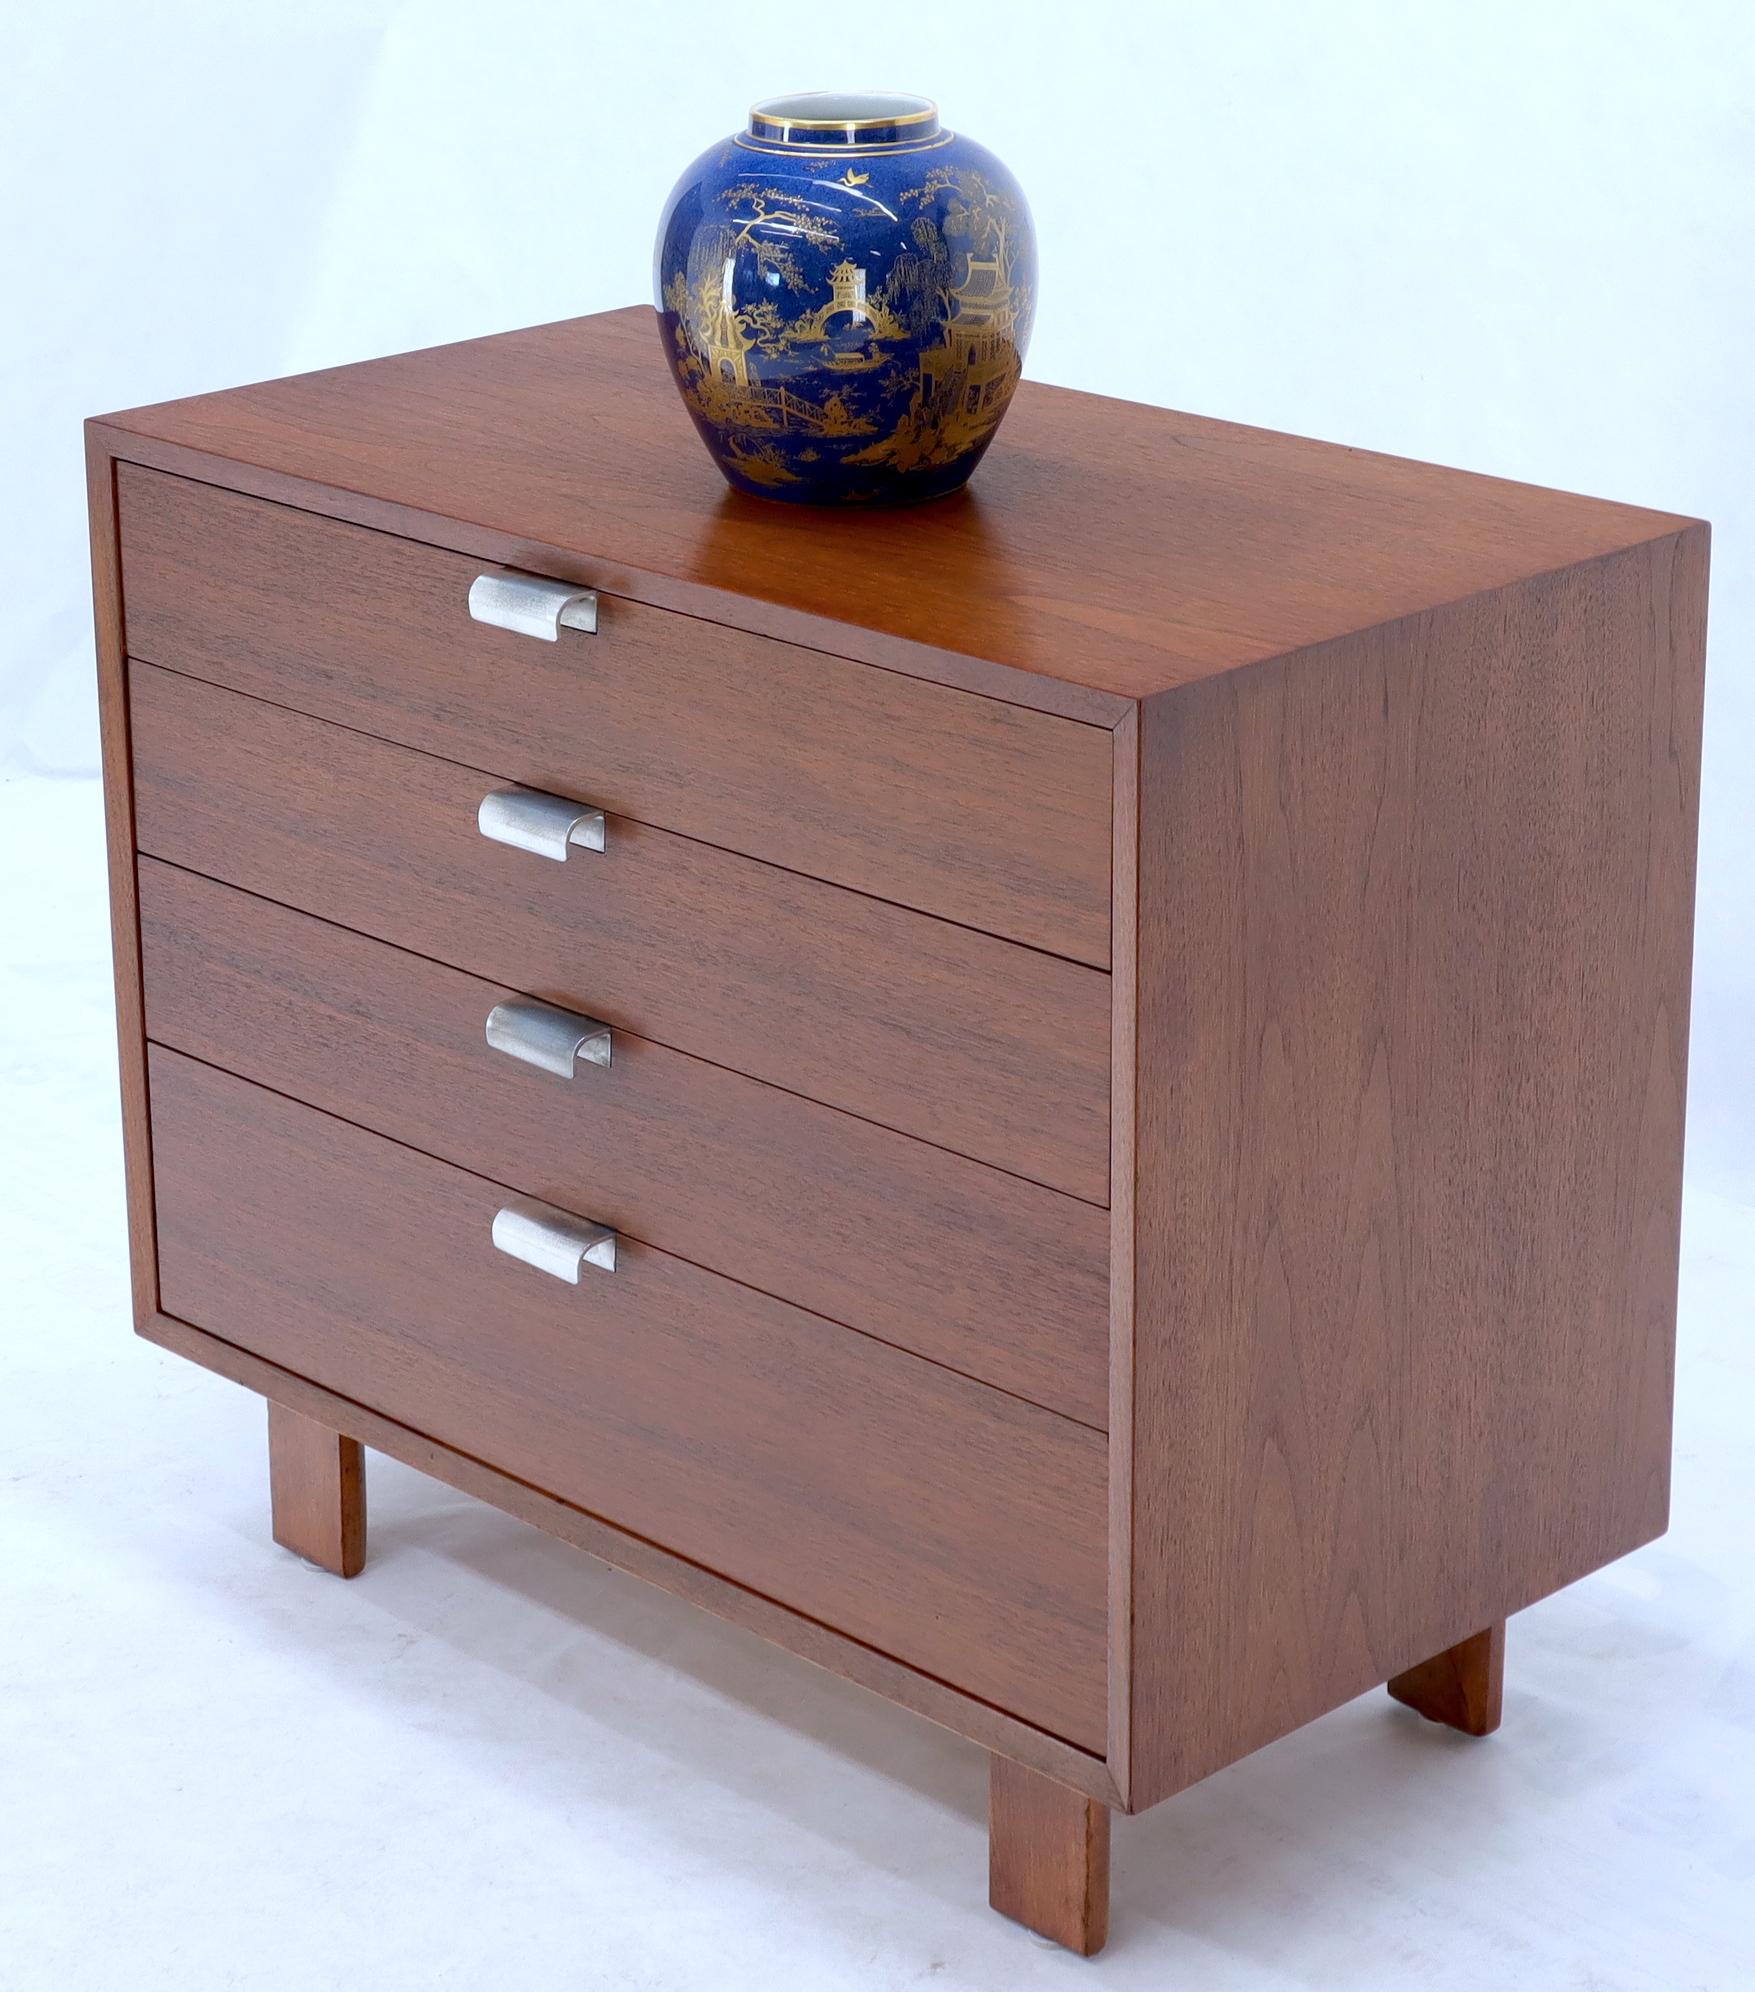 Mid-Century Modern walnut four drawers bachelor chest dresser cabinet designed by George Nelson for Herman Miller.
 